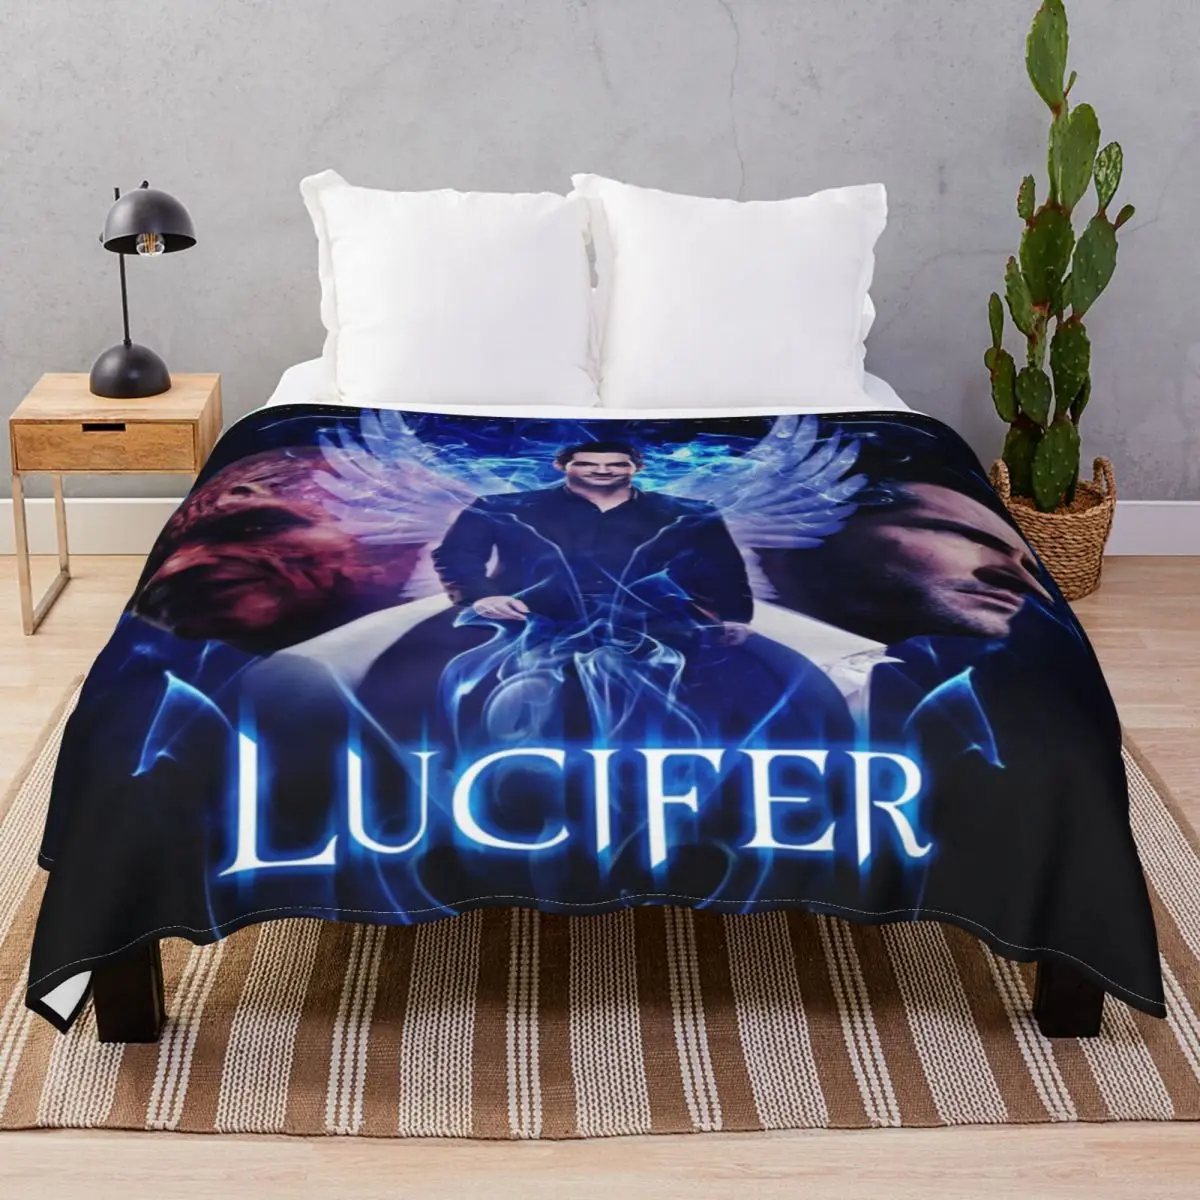 Lucifer Blankets Fleece Textile Decor Ultra-Soft Throw Blanket for Bedding Home Couch Camp Office